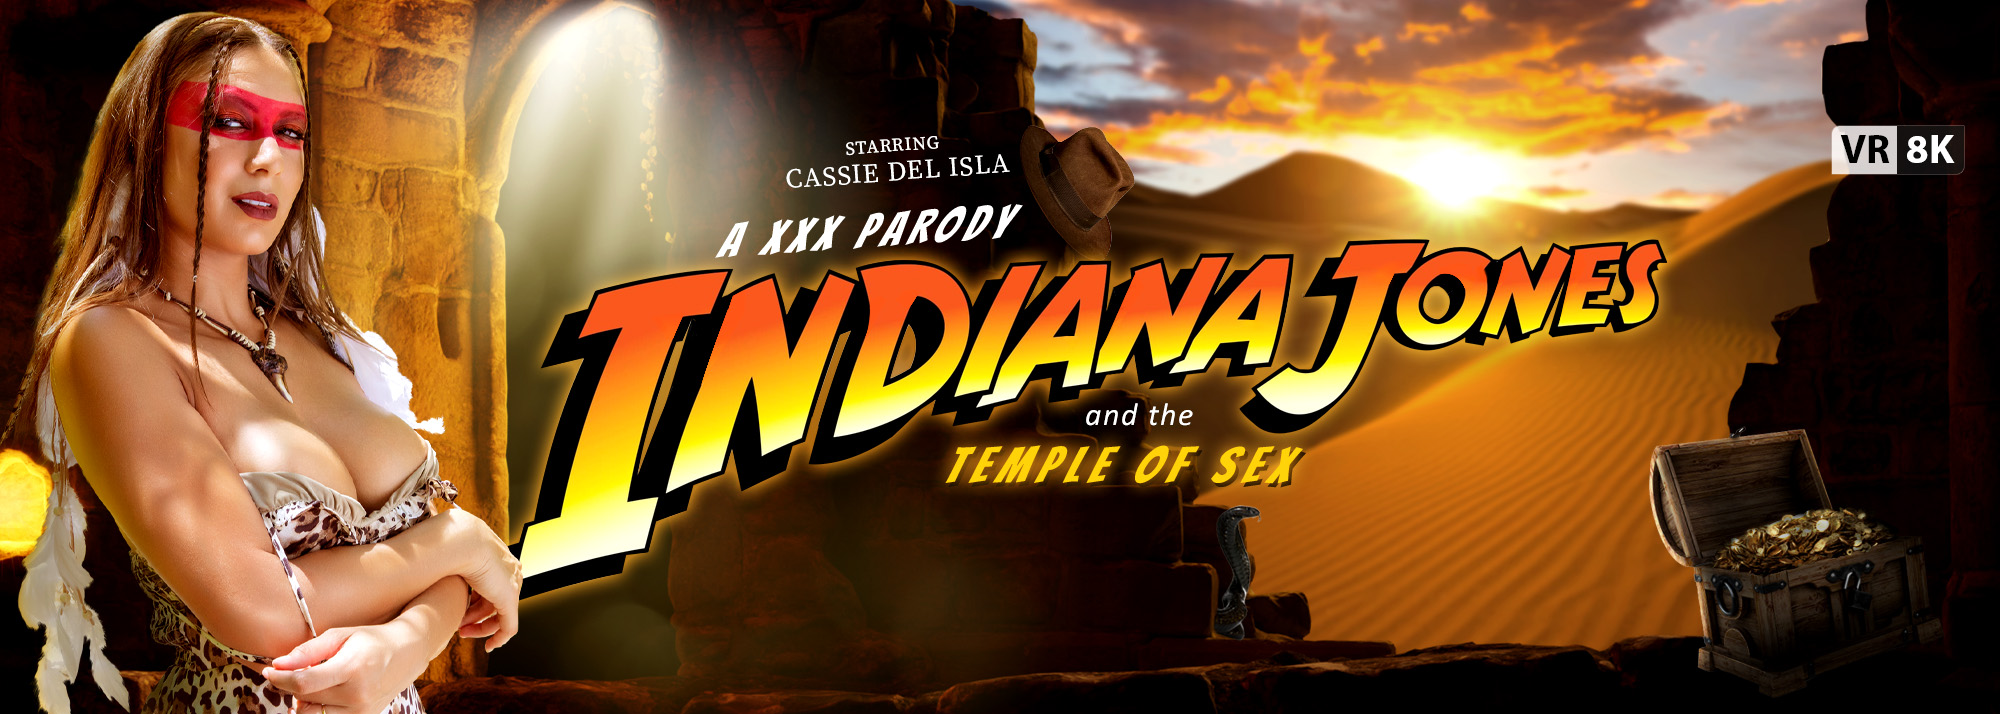 Indiana Jones and the Temple of Sex (A XXX Parody) - VR Porn Video, Starring: Cassie Del Isla VR